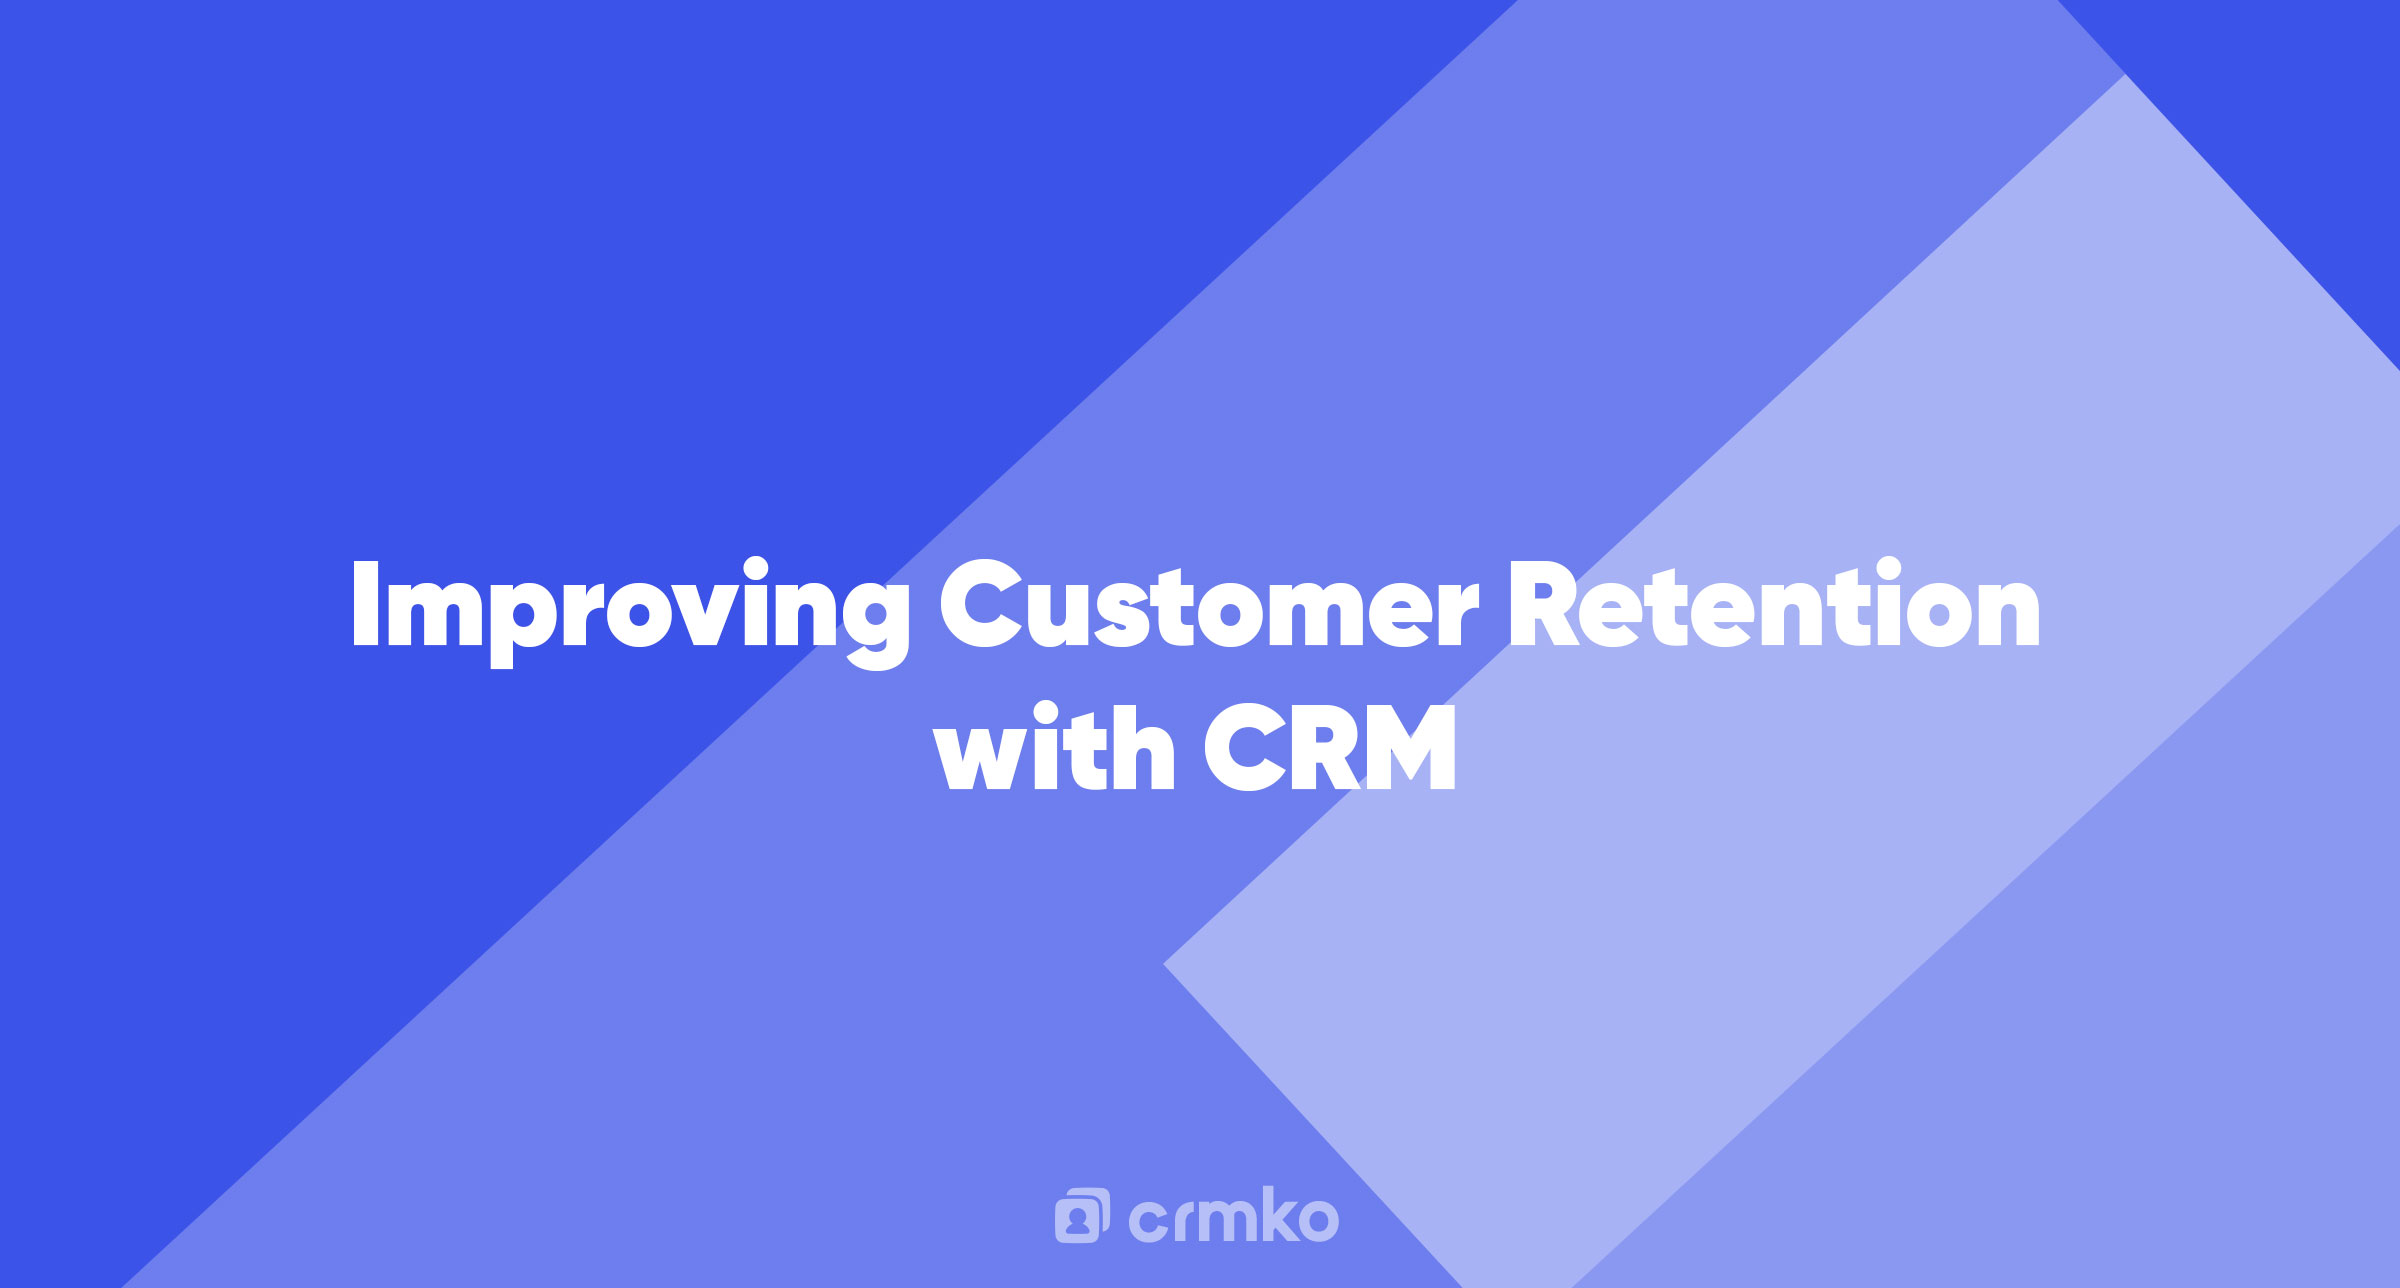 Article | Improving Customer Retention with CRM: Strategies and Tips